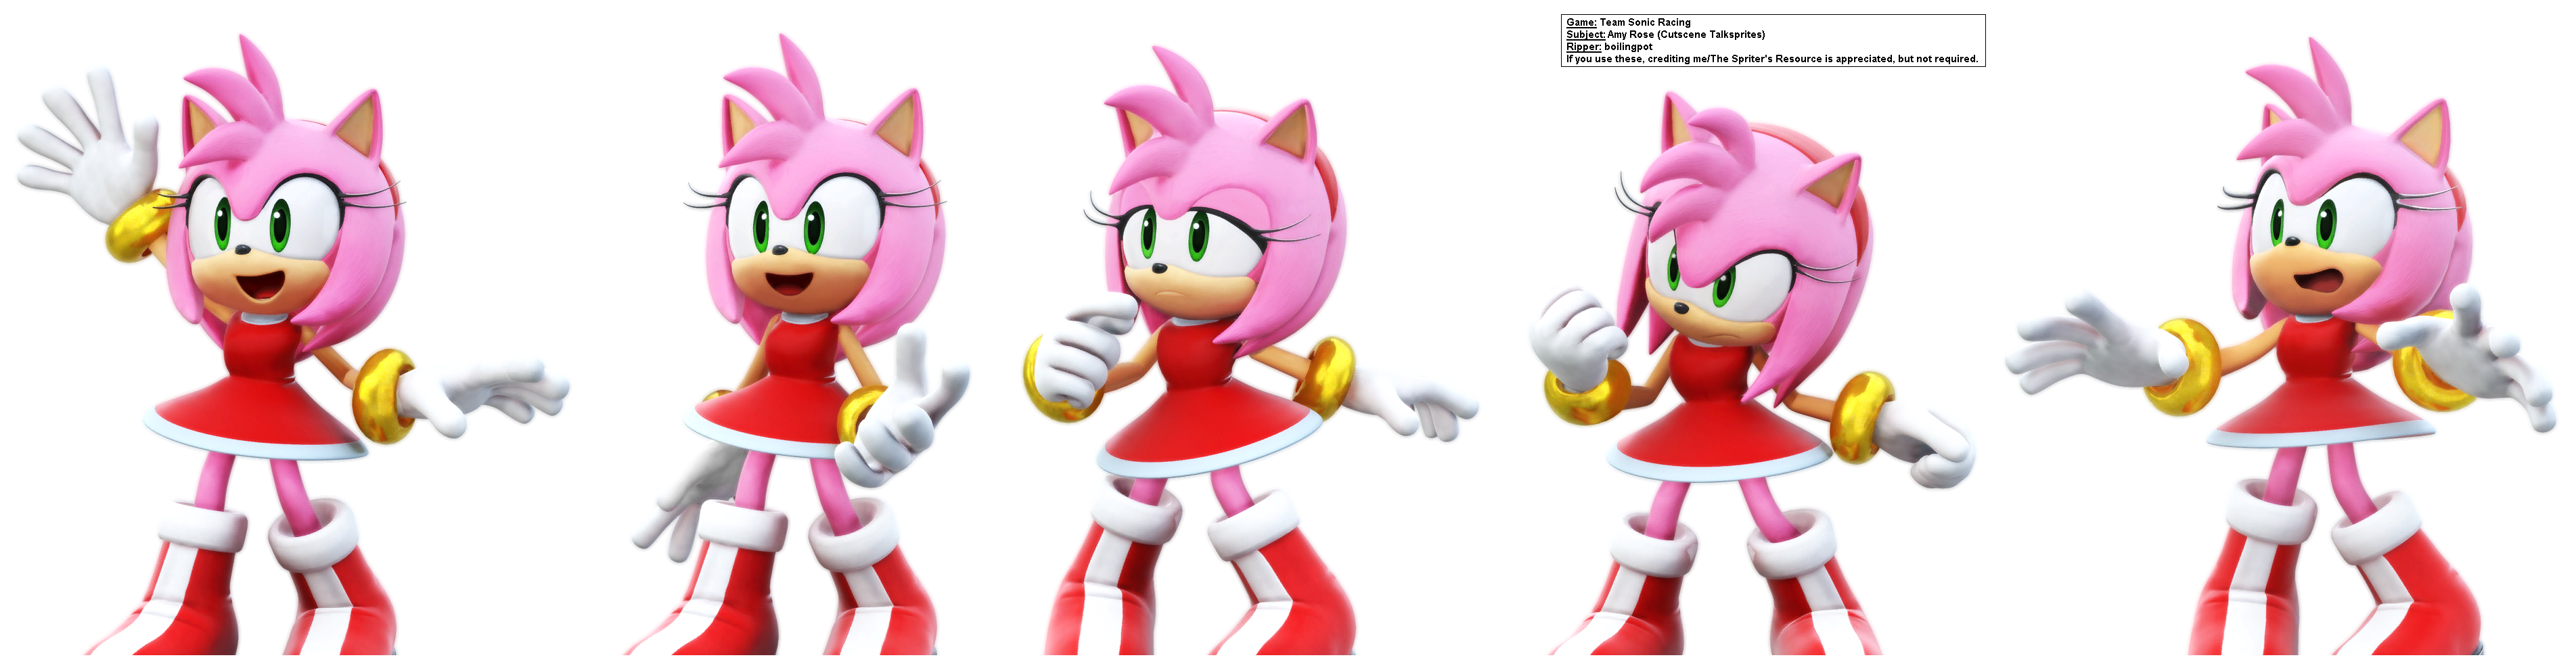 Game Boy Advance - Sonic Advance 2 - Amy Rose - The Spriters Resource